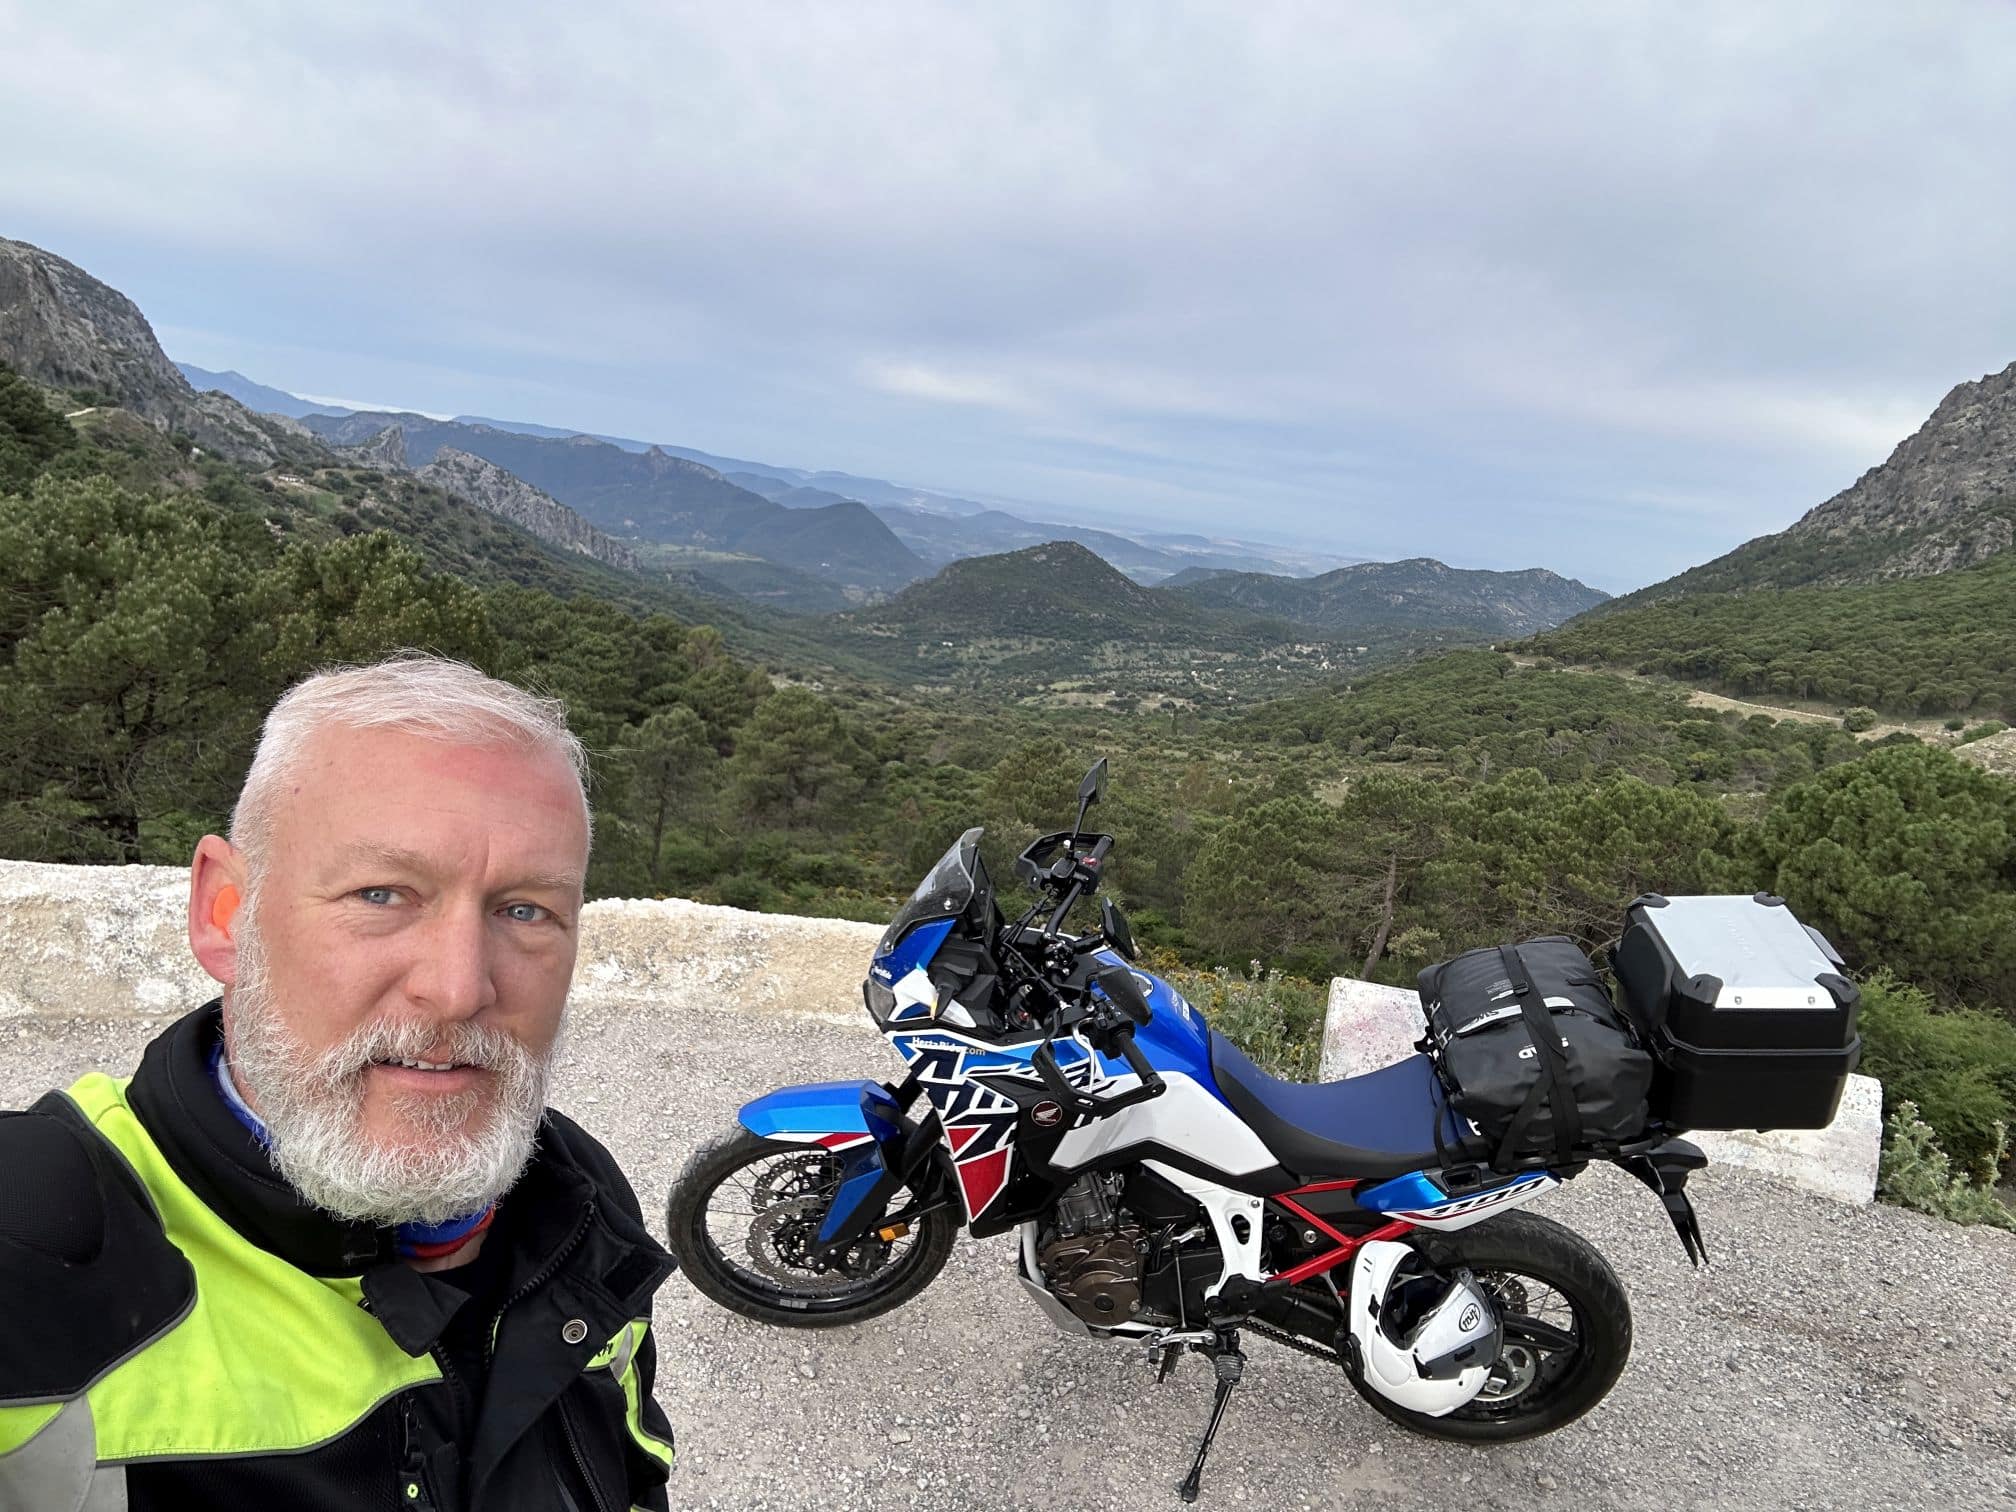 What to Pack for a 2 Week Motorcycle Trip in Europe